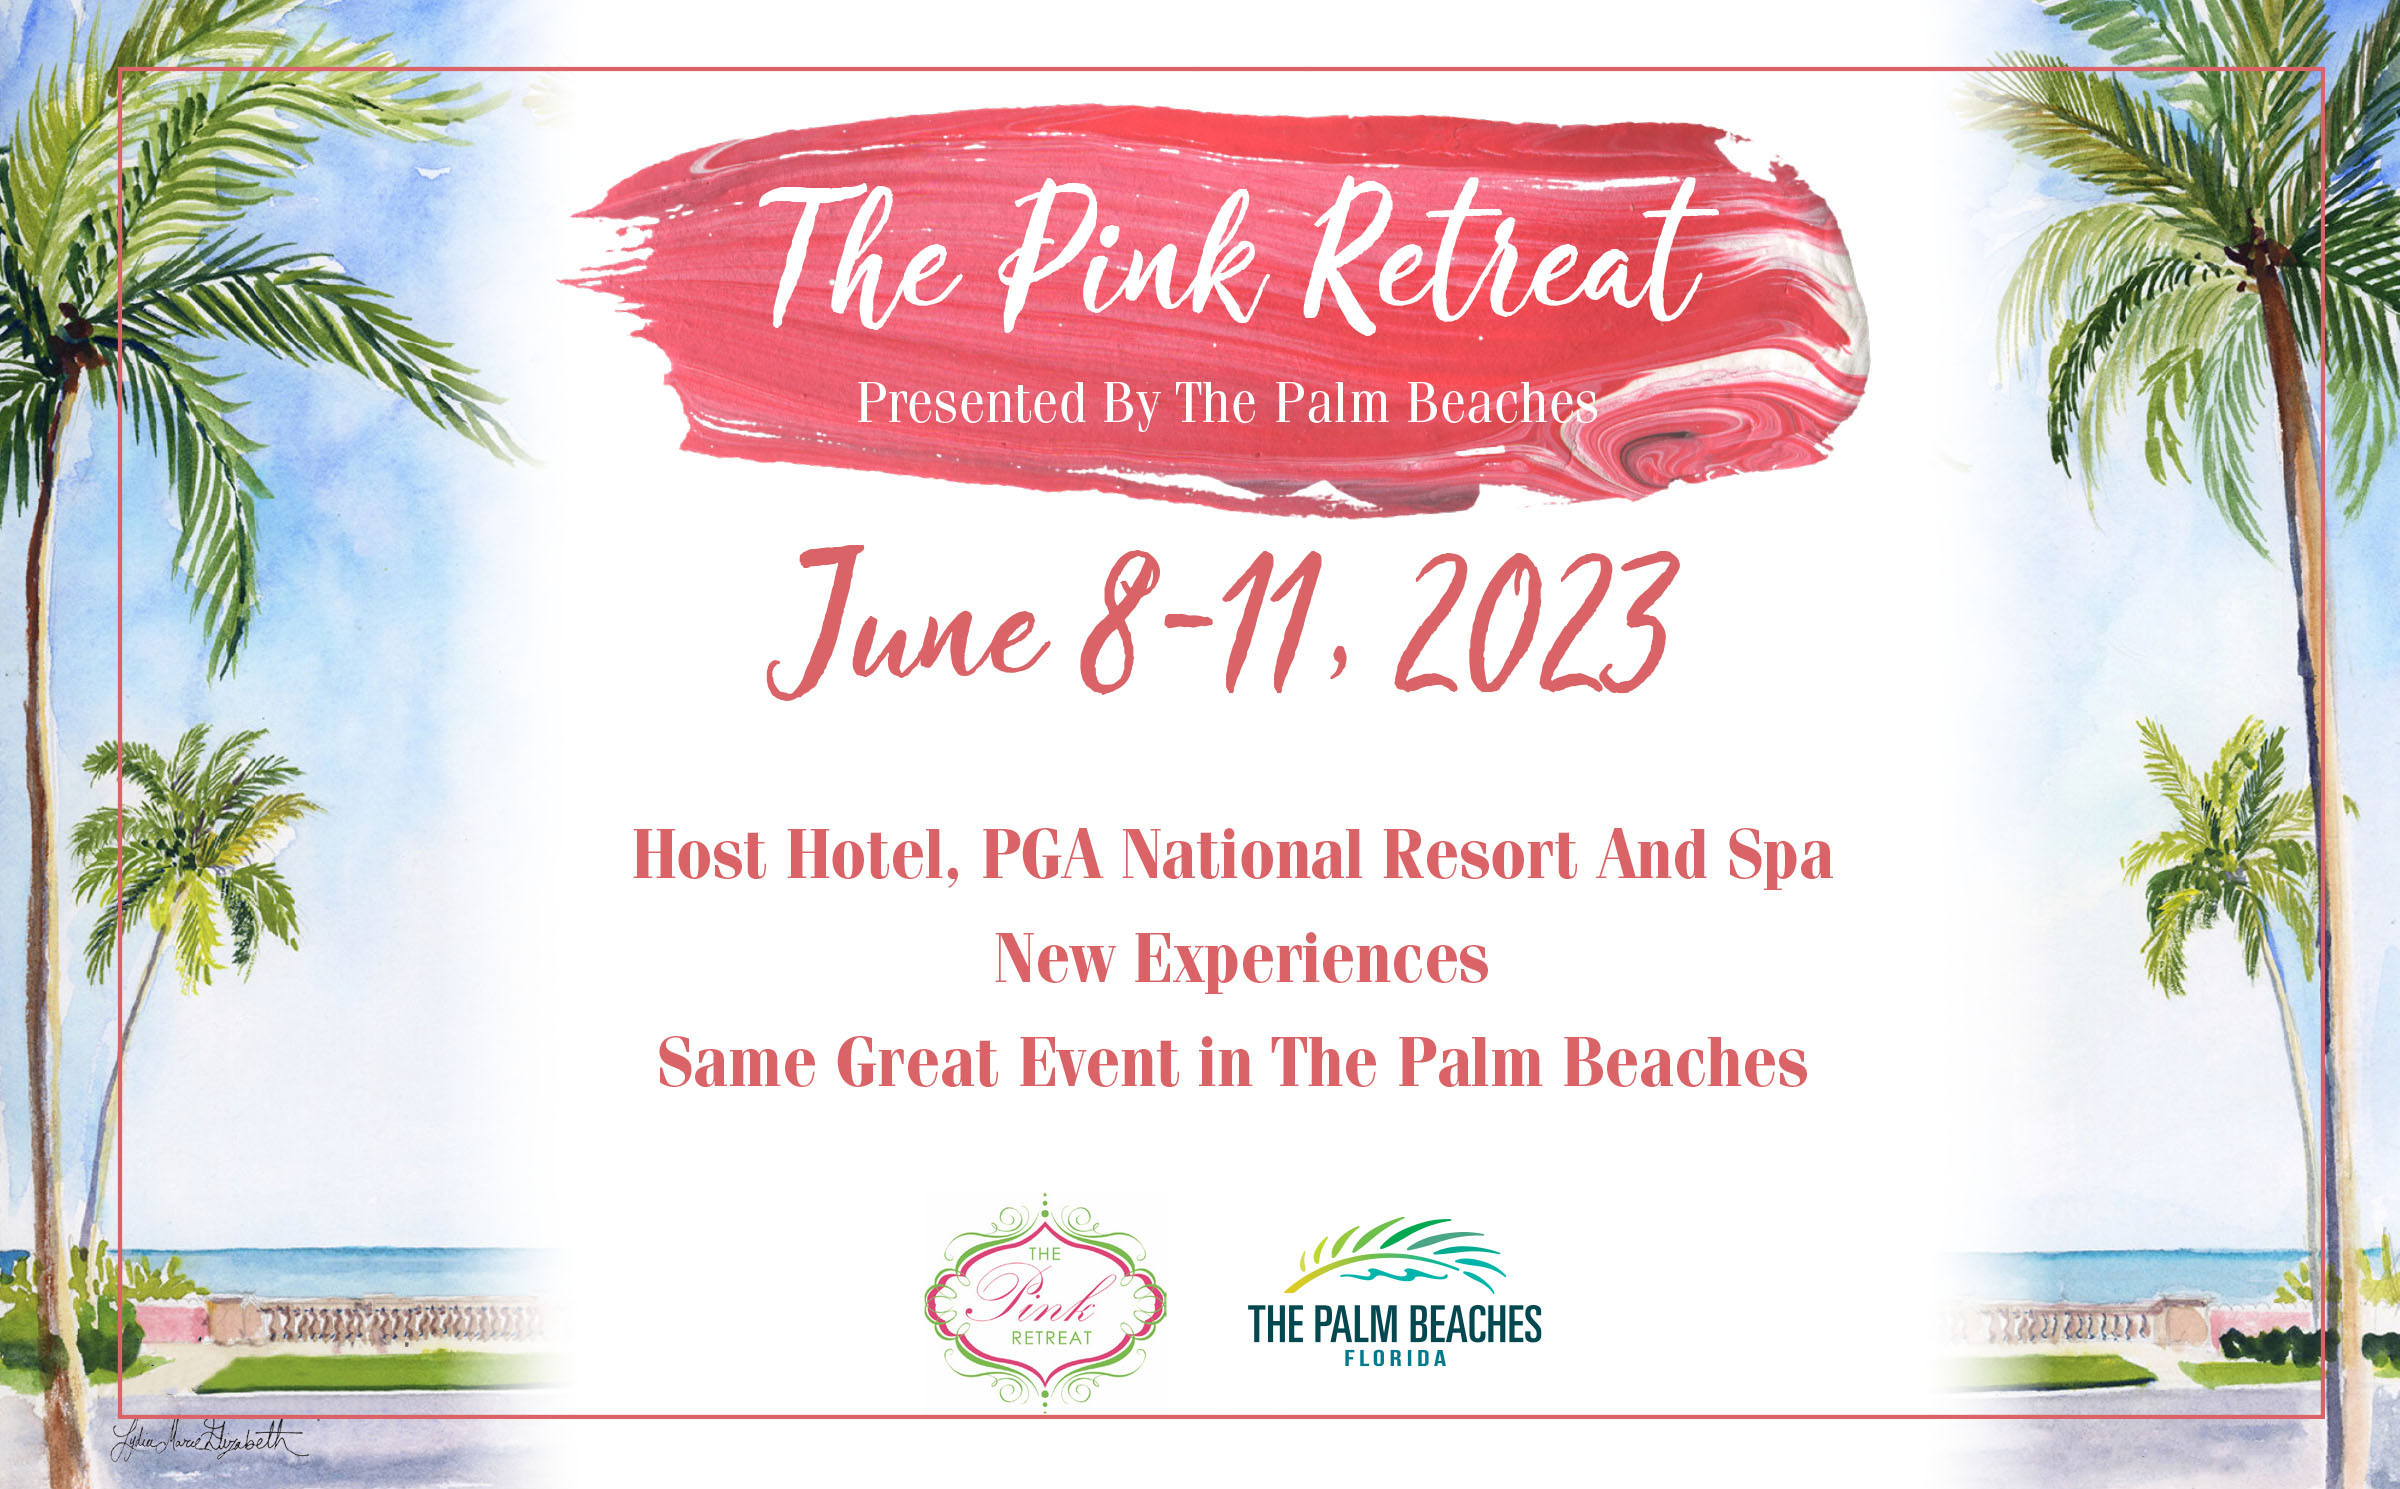 The Pink Retreat